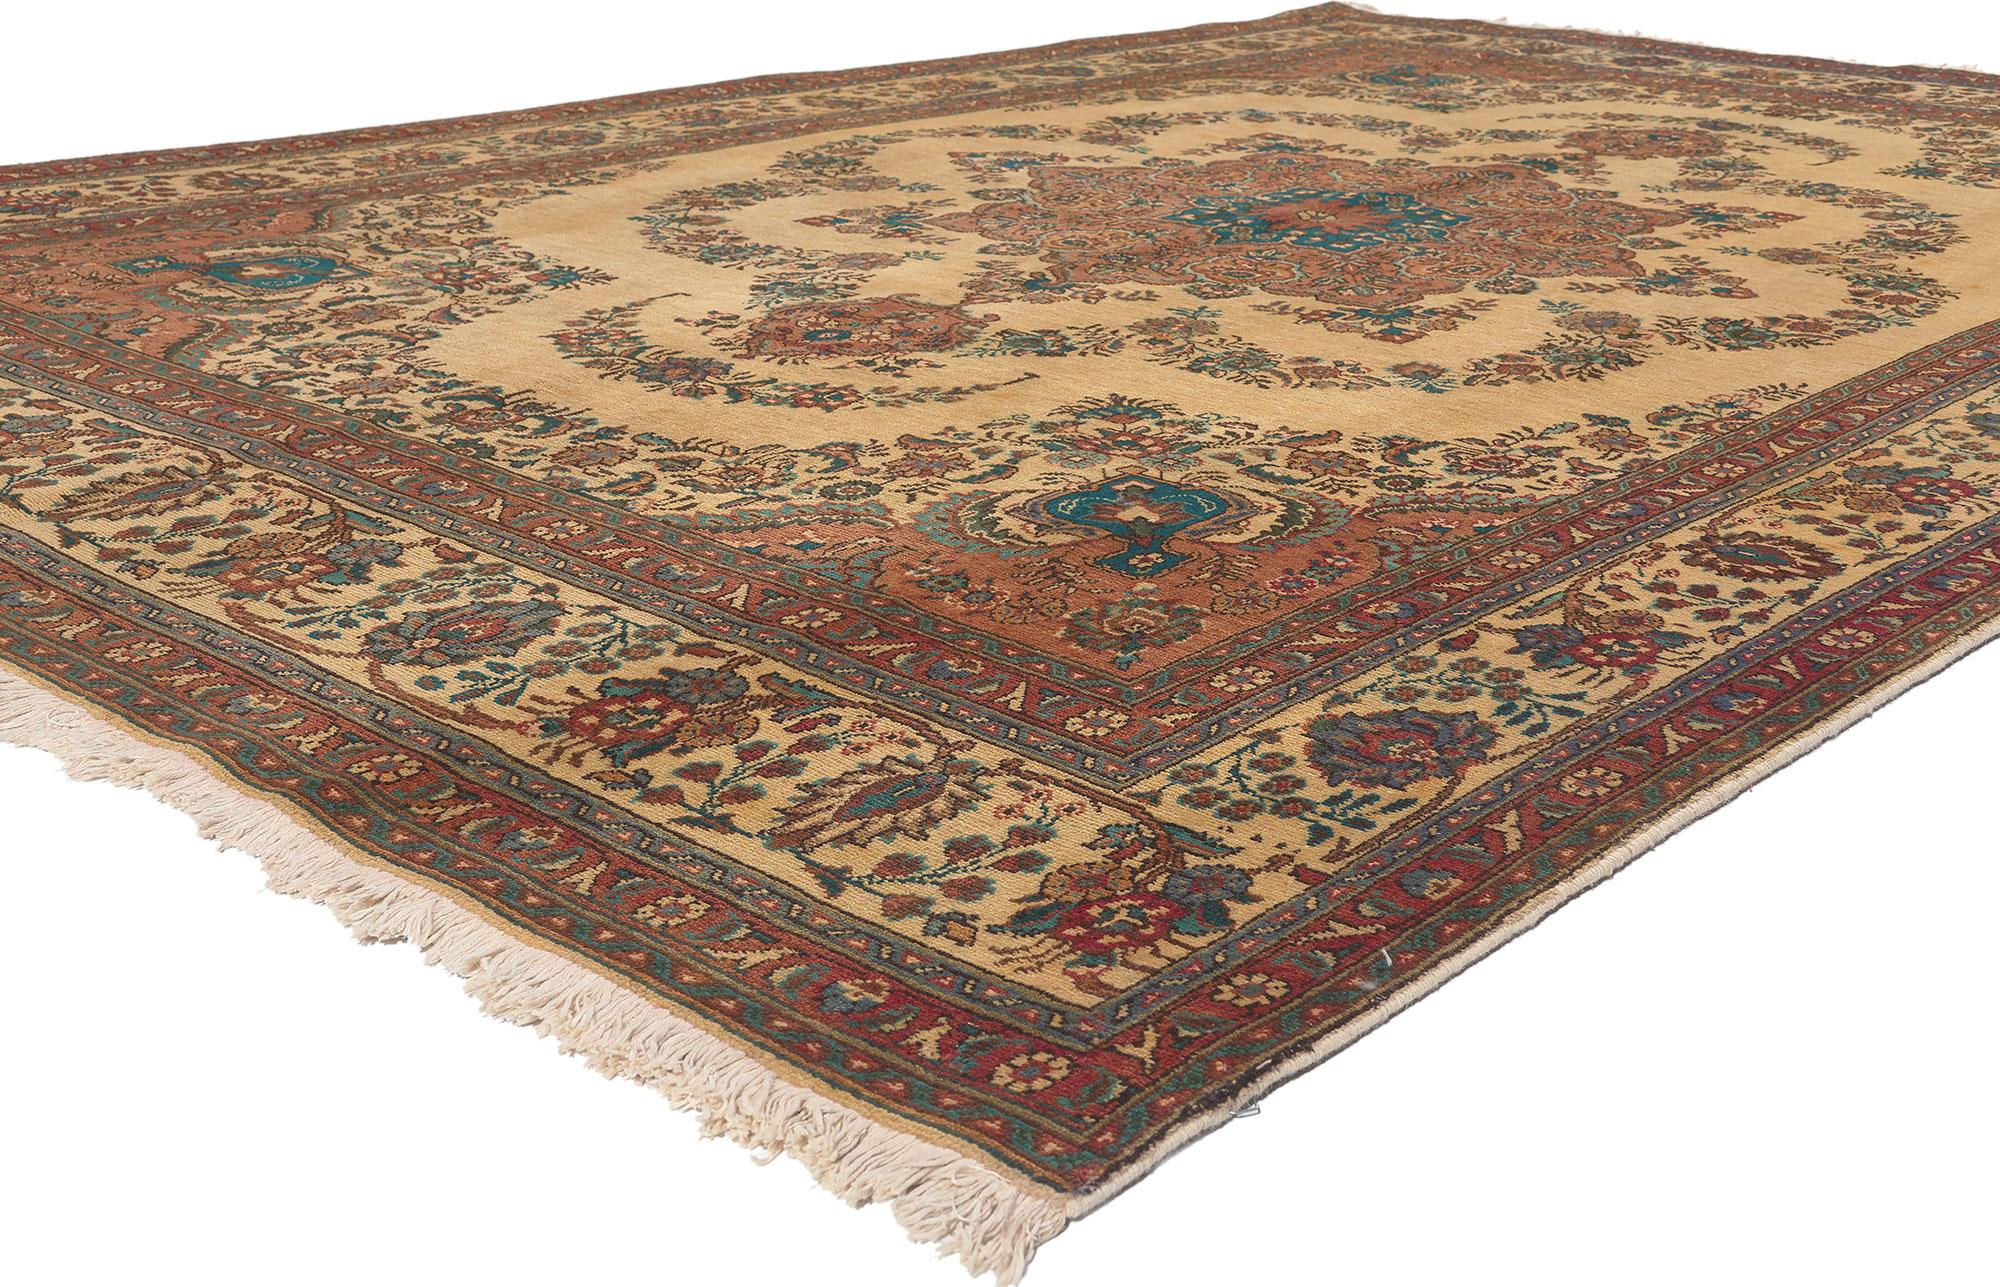 76361 Vintage Persian Tabriz Rug, 08'00 X 11'07. 
Understated elegance meets Italian Nonna Chic in this vintage Persian Tabriz rug. The intricate floral design and earth-tone colors woven into this piece work together creating an atmosphere rooted